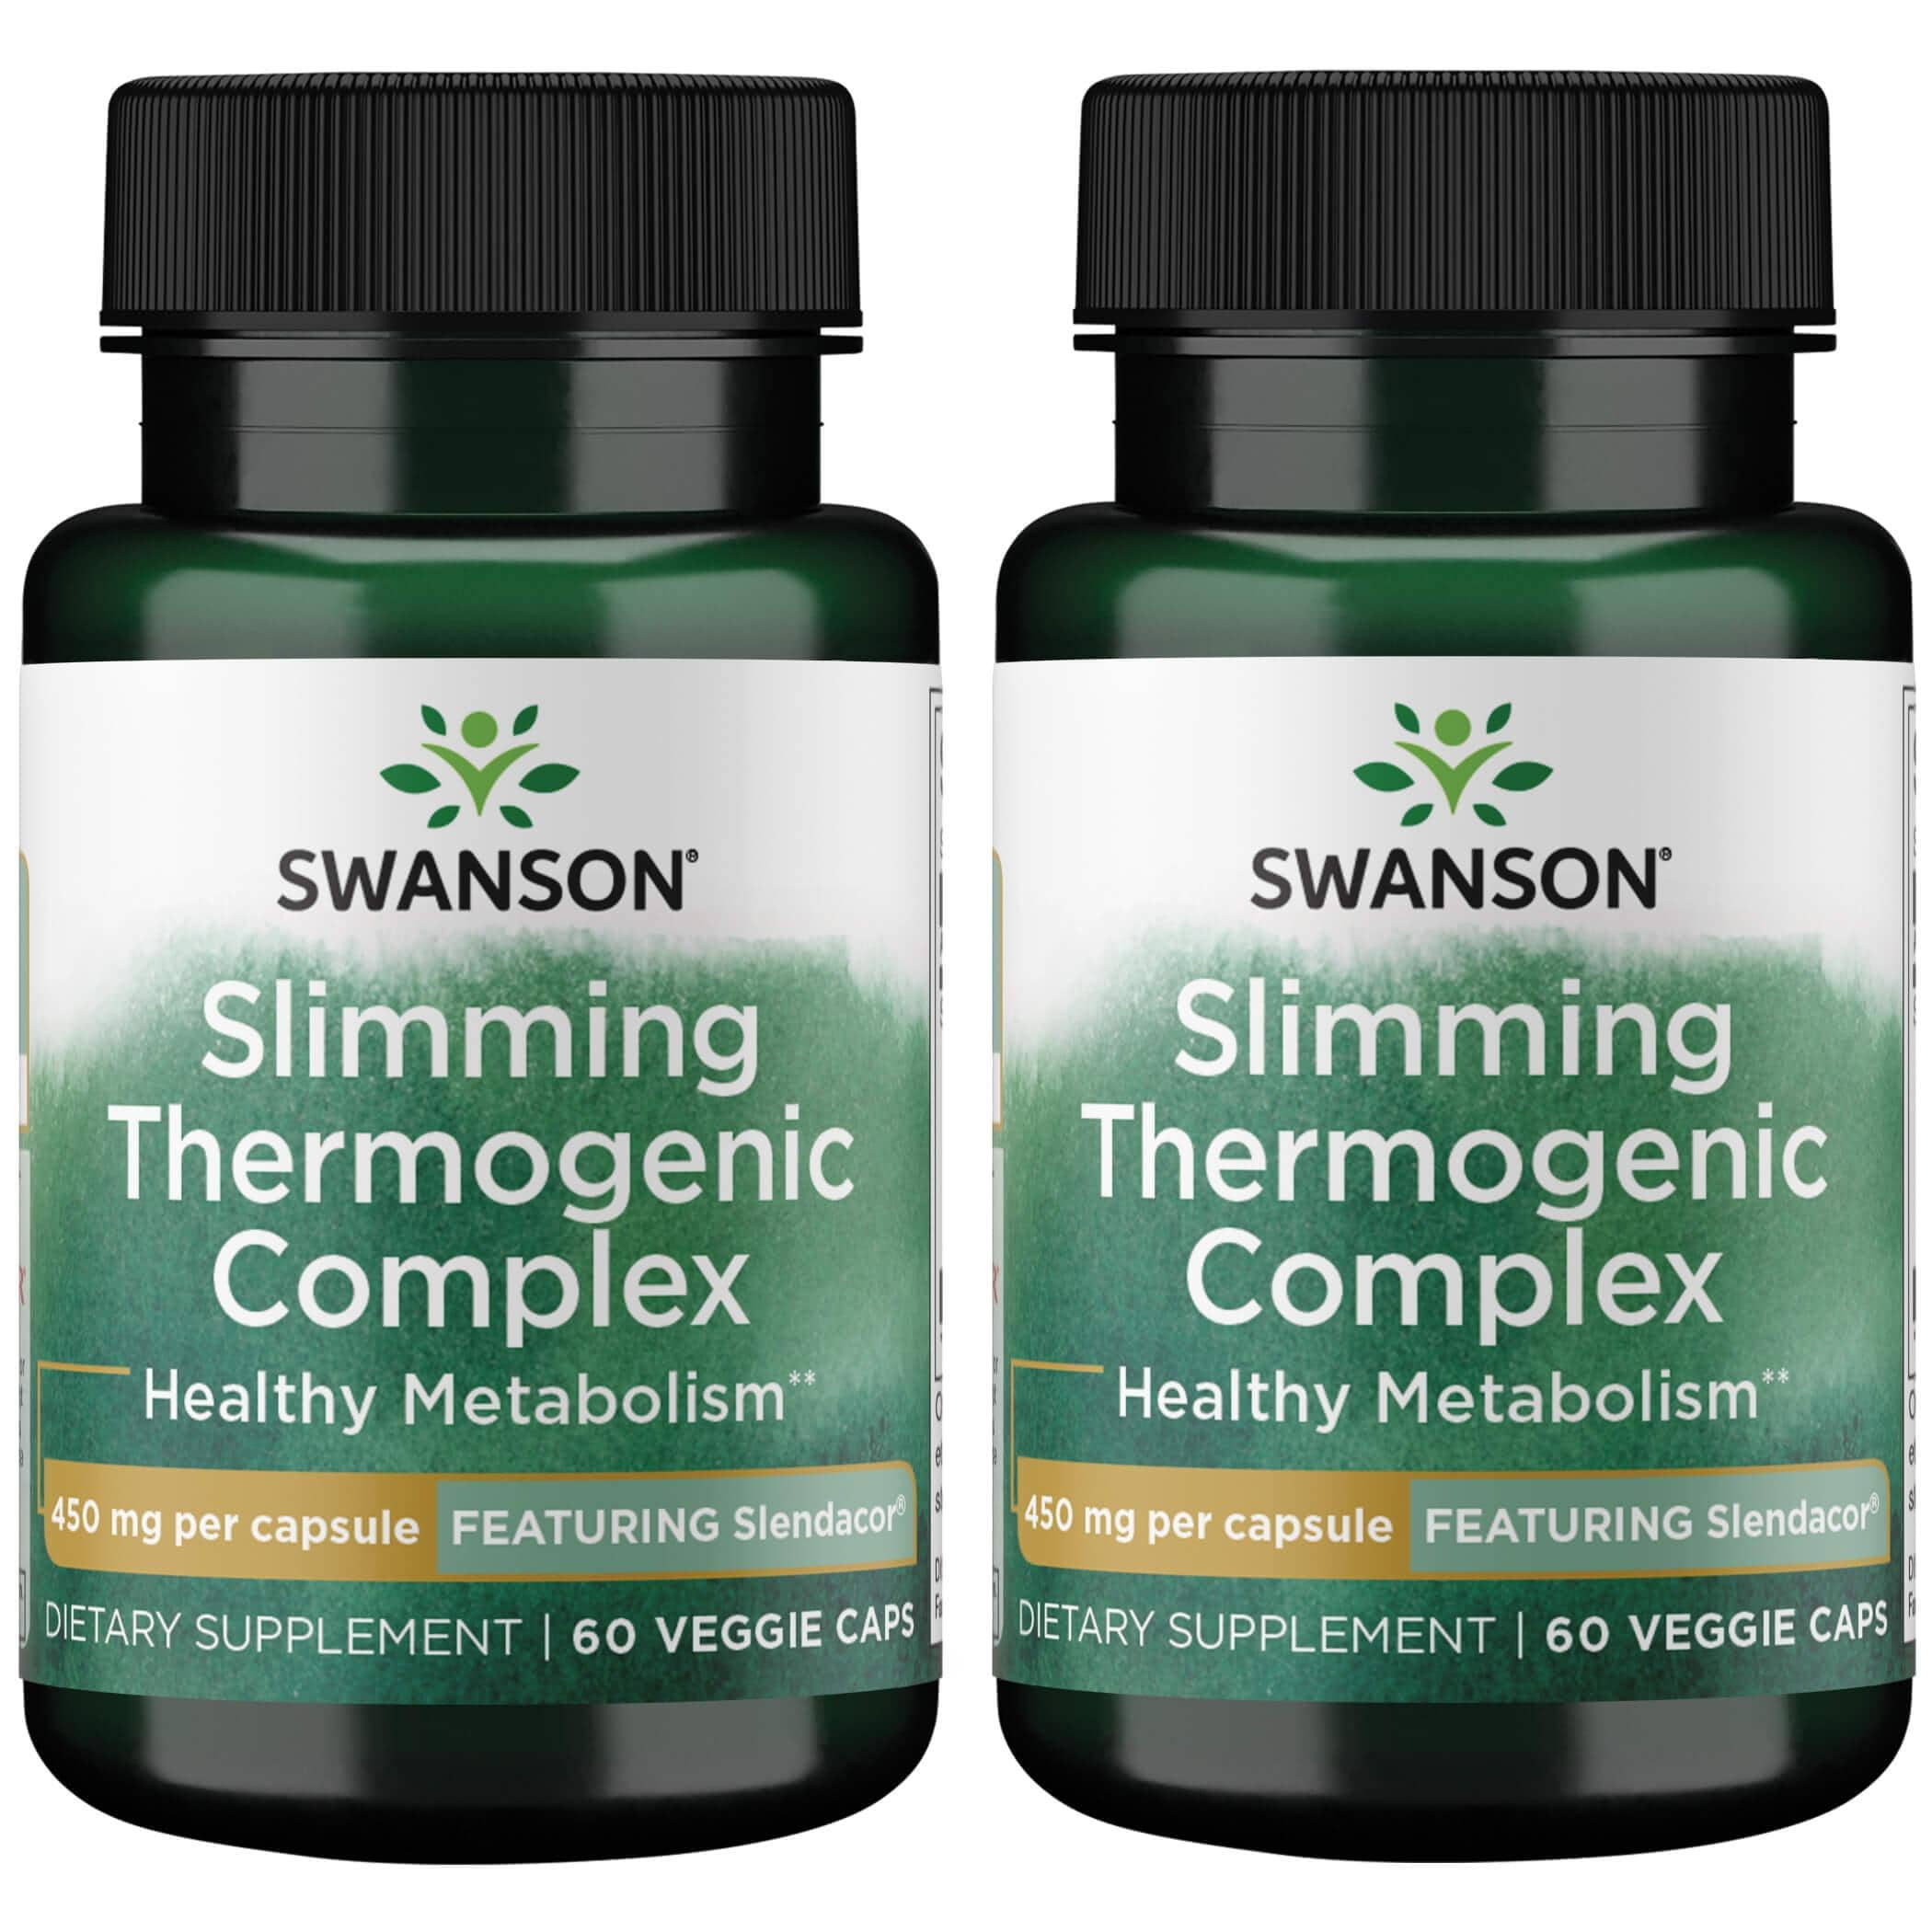 Swanson Slimming Thermogenic Complex - Featuring Slendacor 2 Pack 